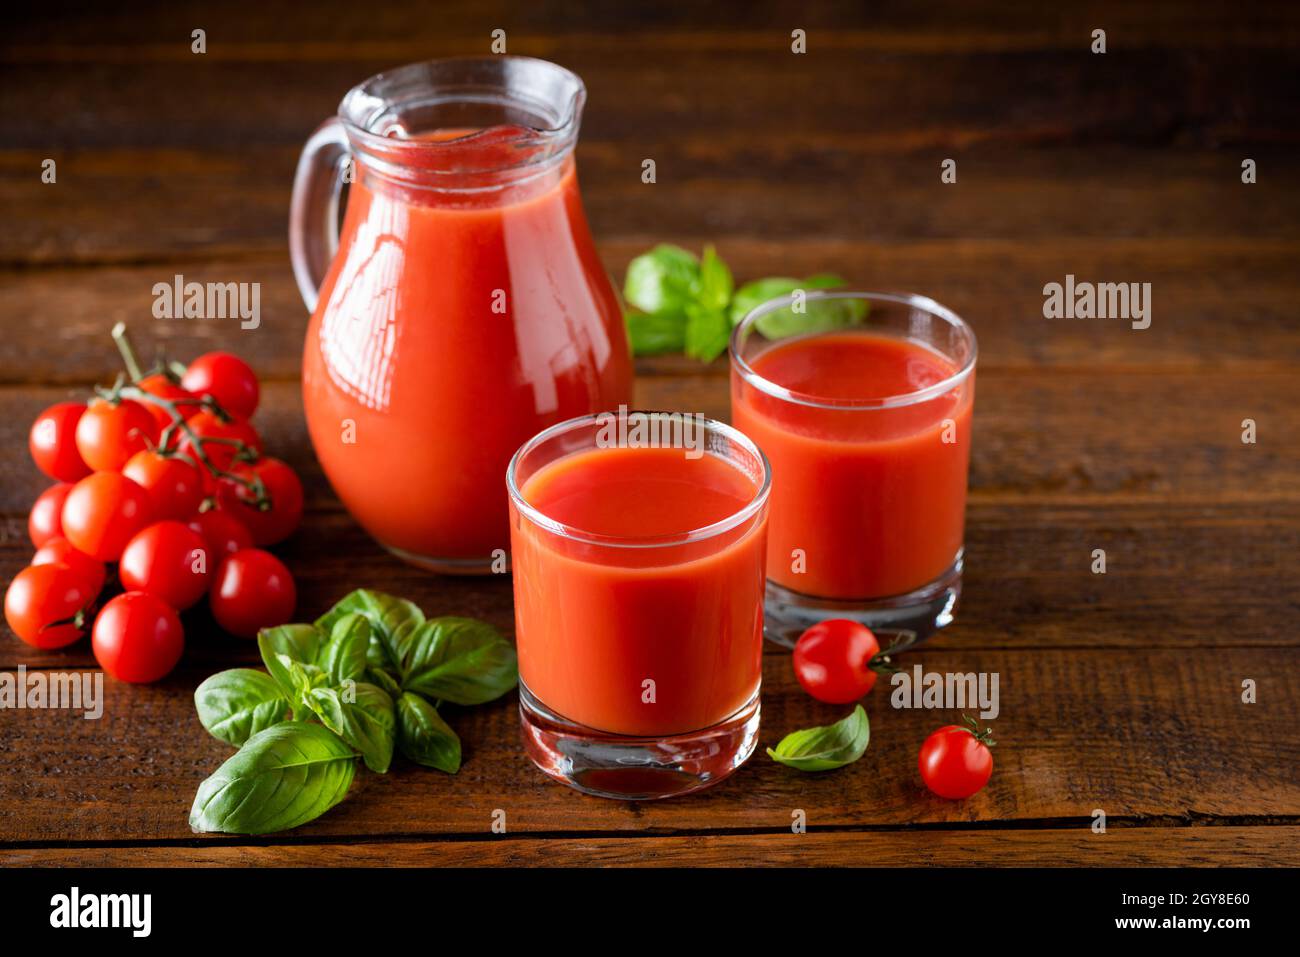 Tomato juice in glass on a wooden table background. Natural organic tomato juice Stock Photo